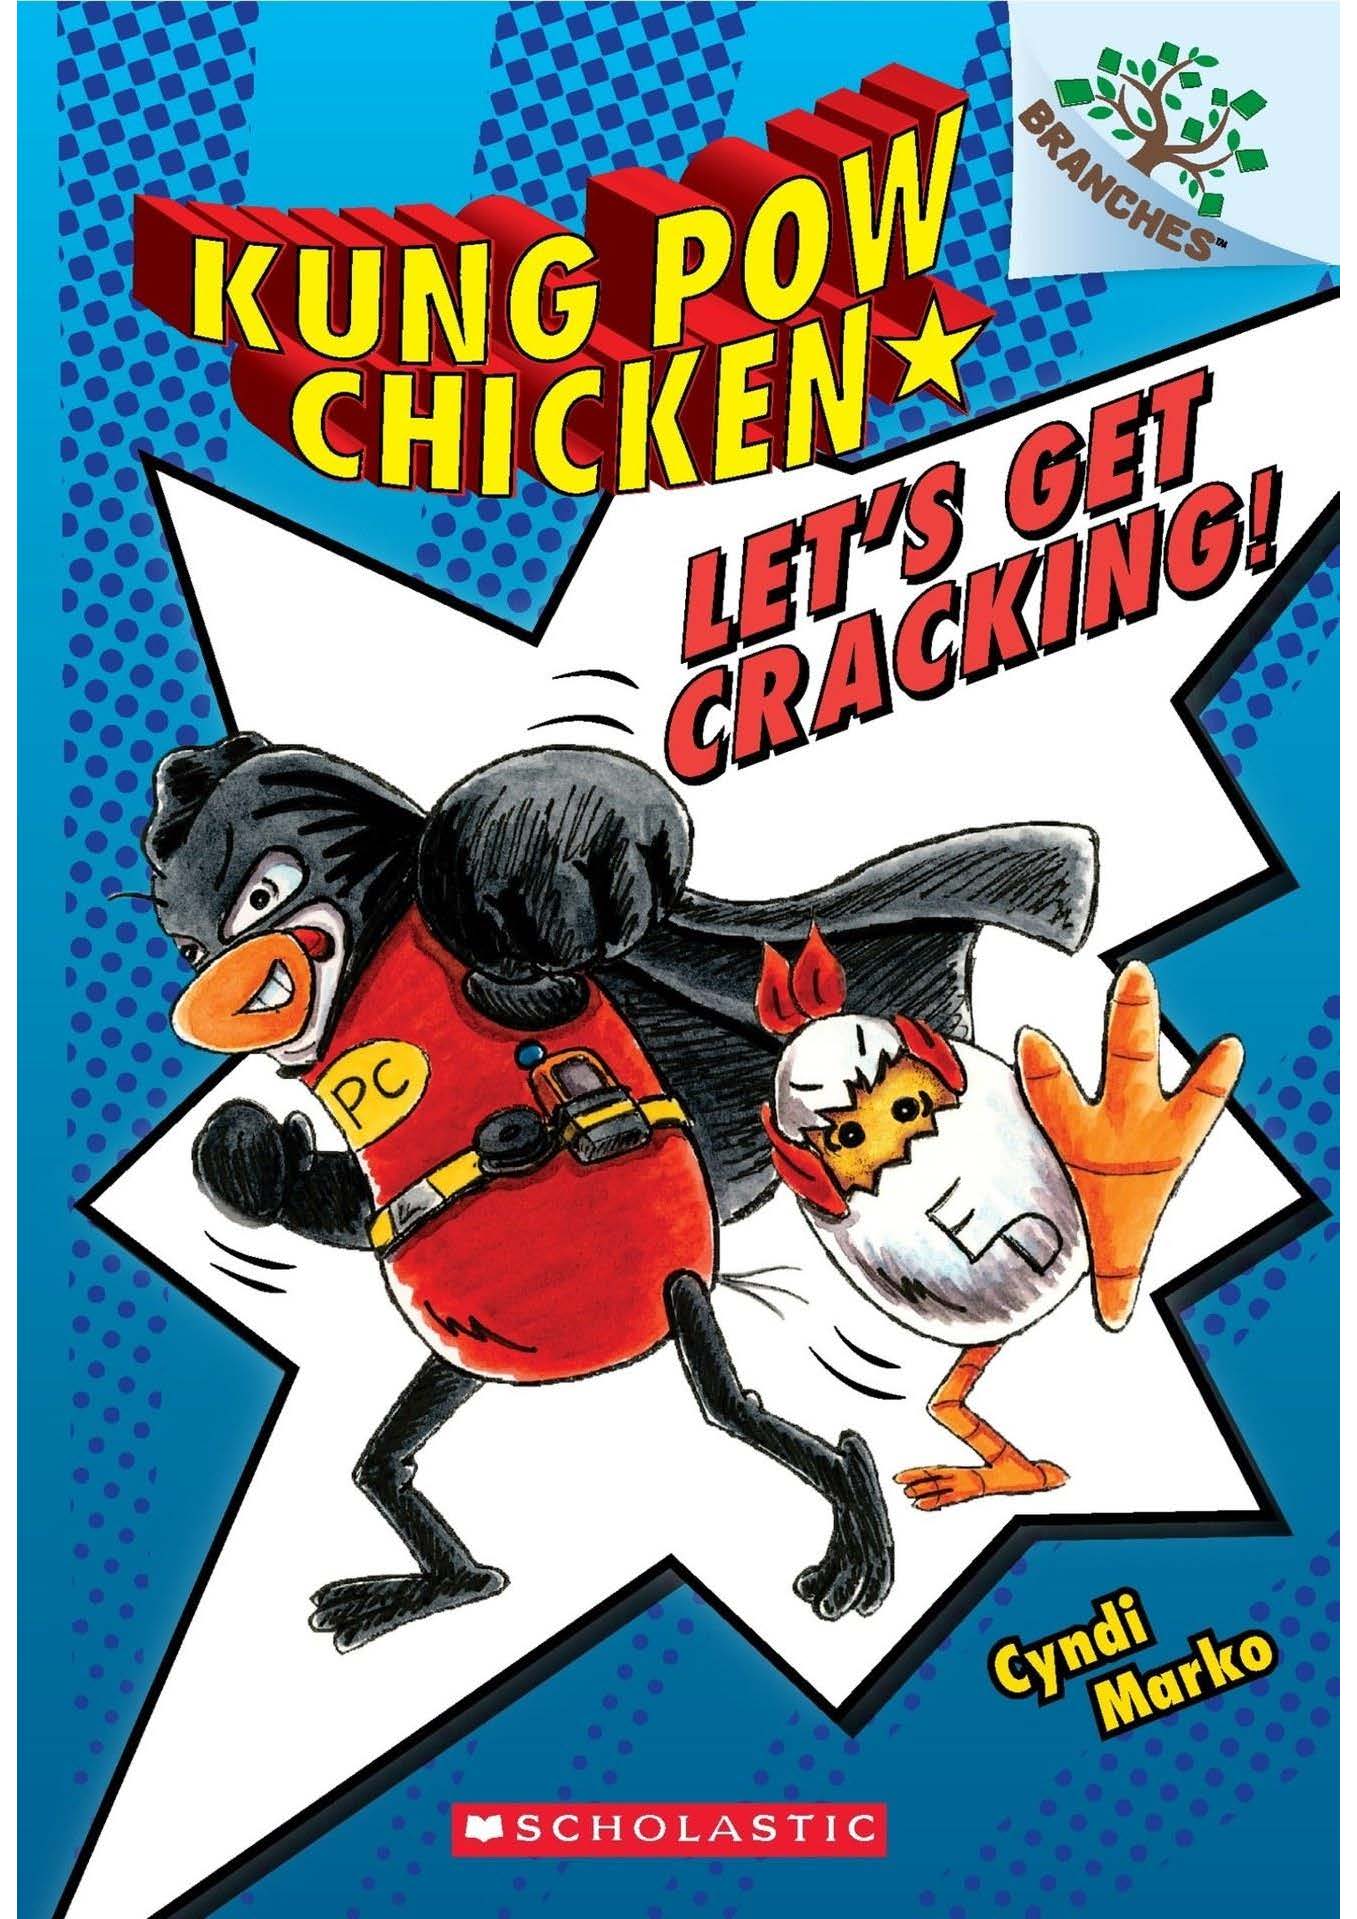 Kung-Pow-Chicken_页面_01